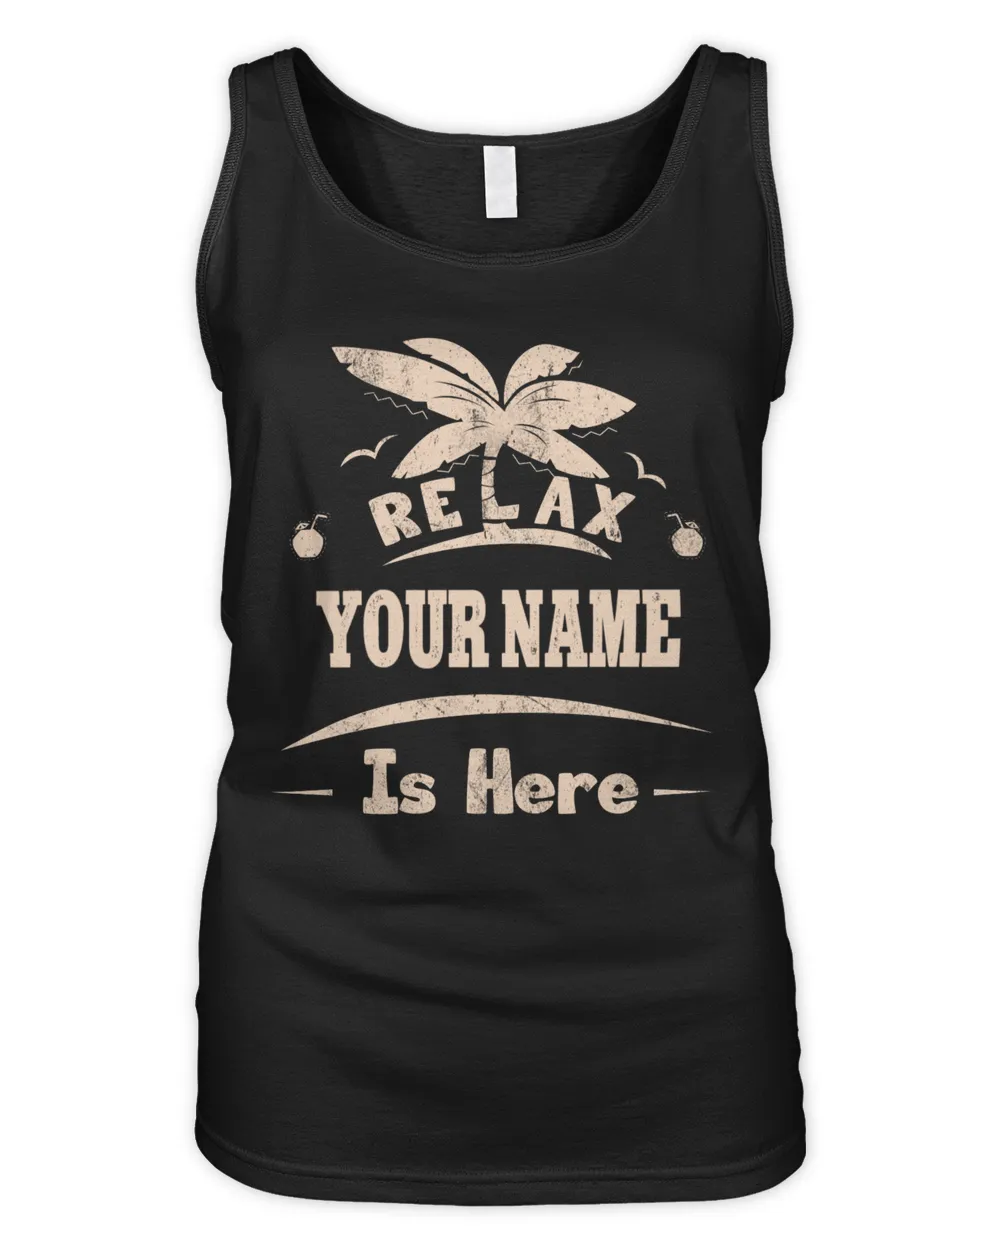 Relax YOUR NAME is Here